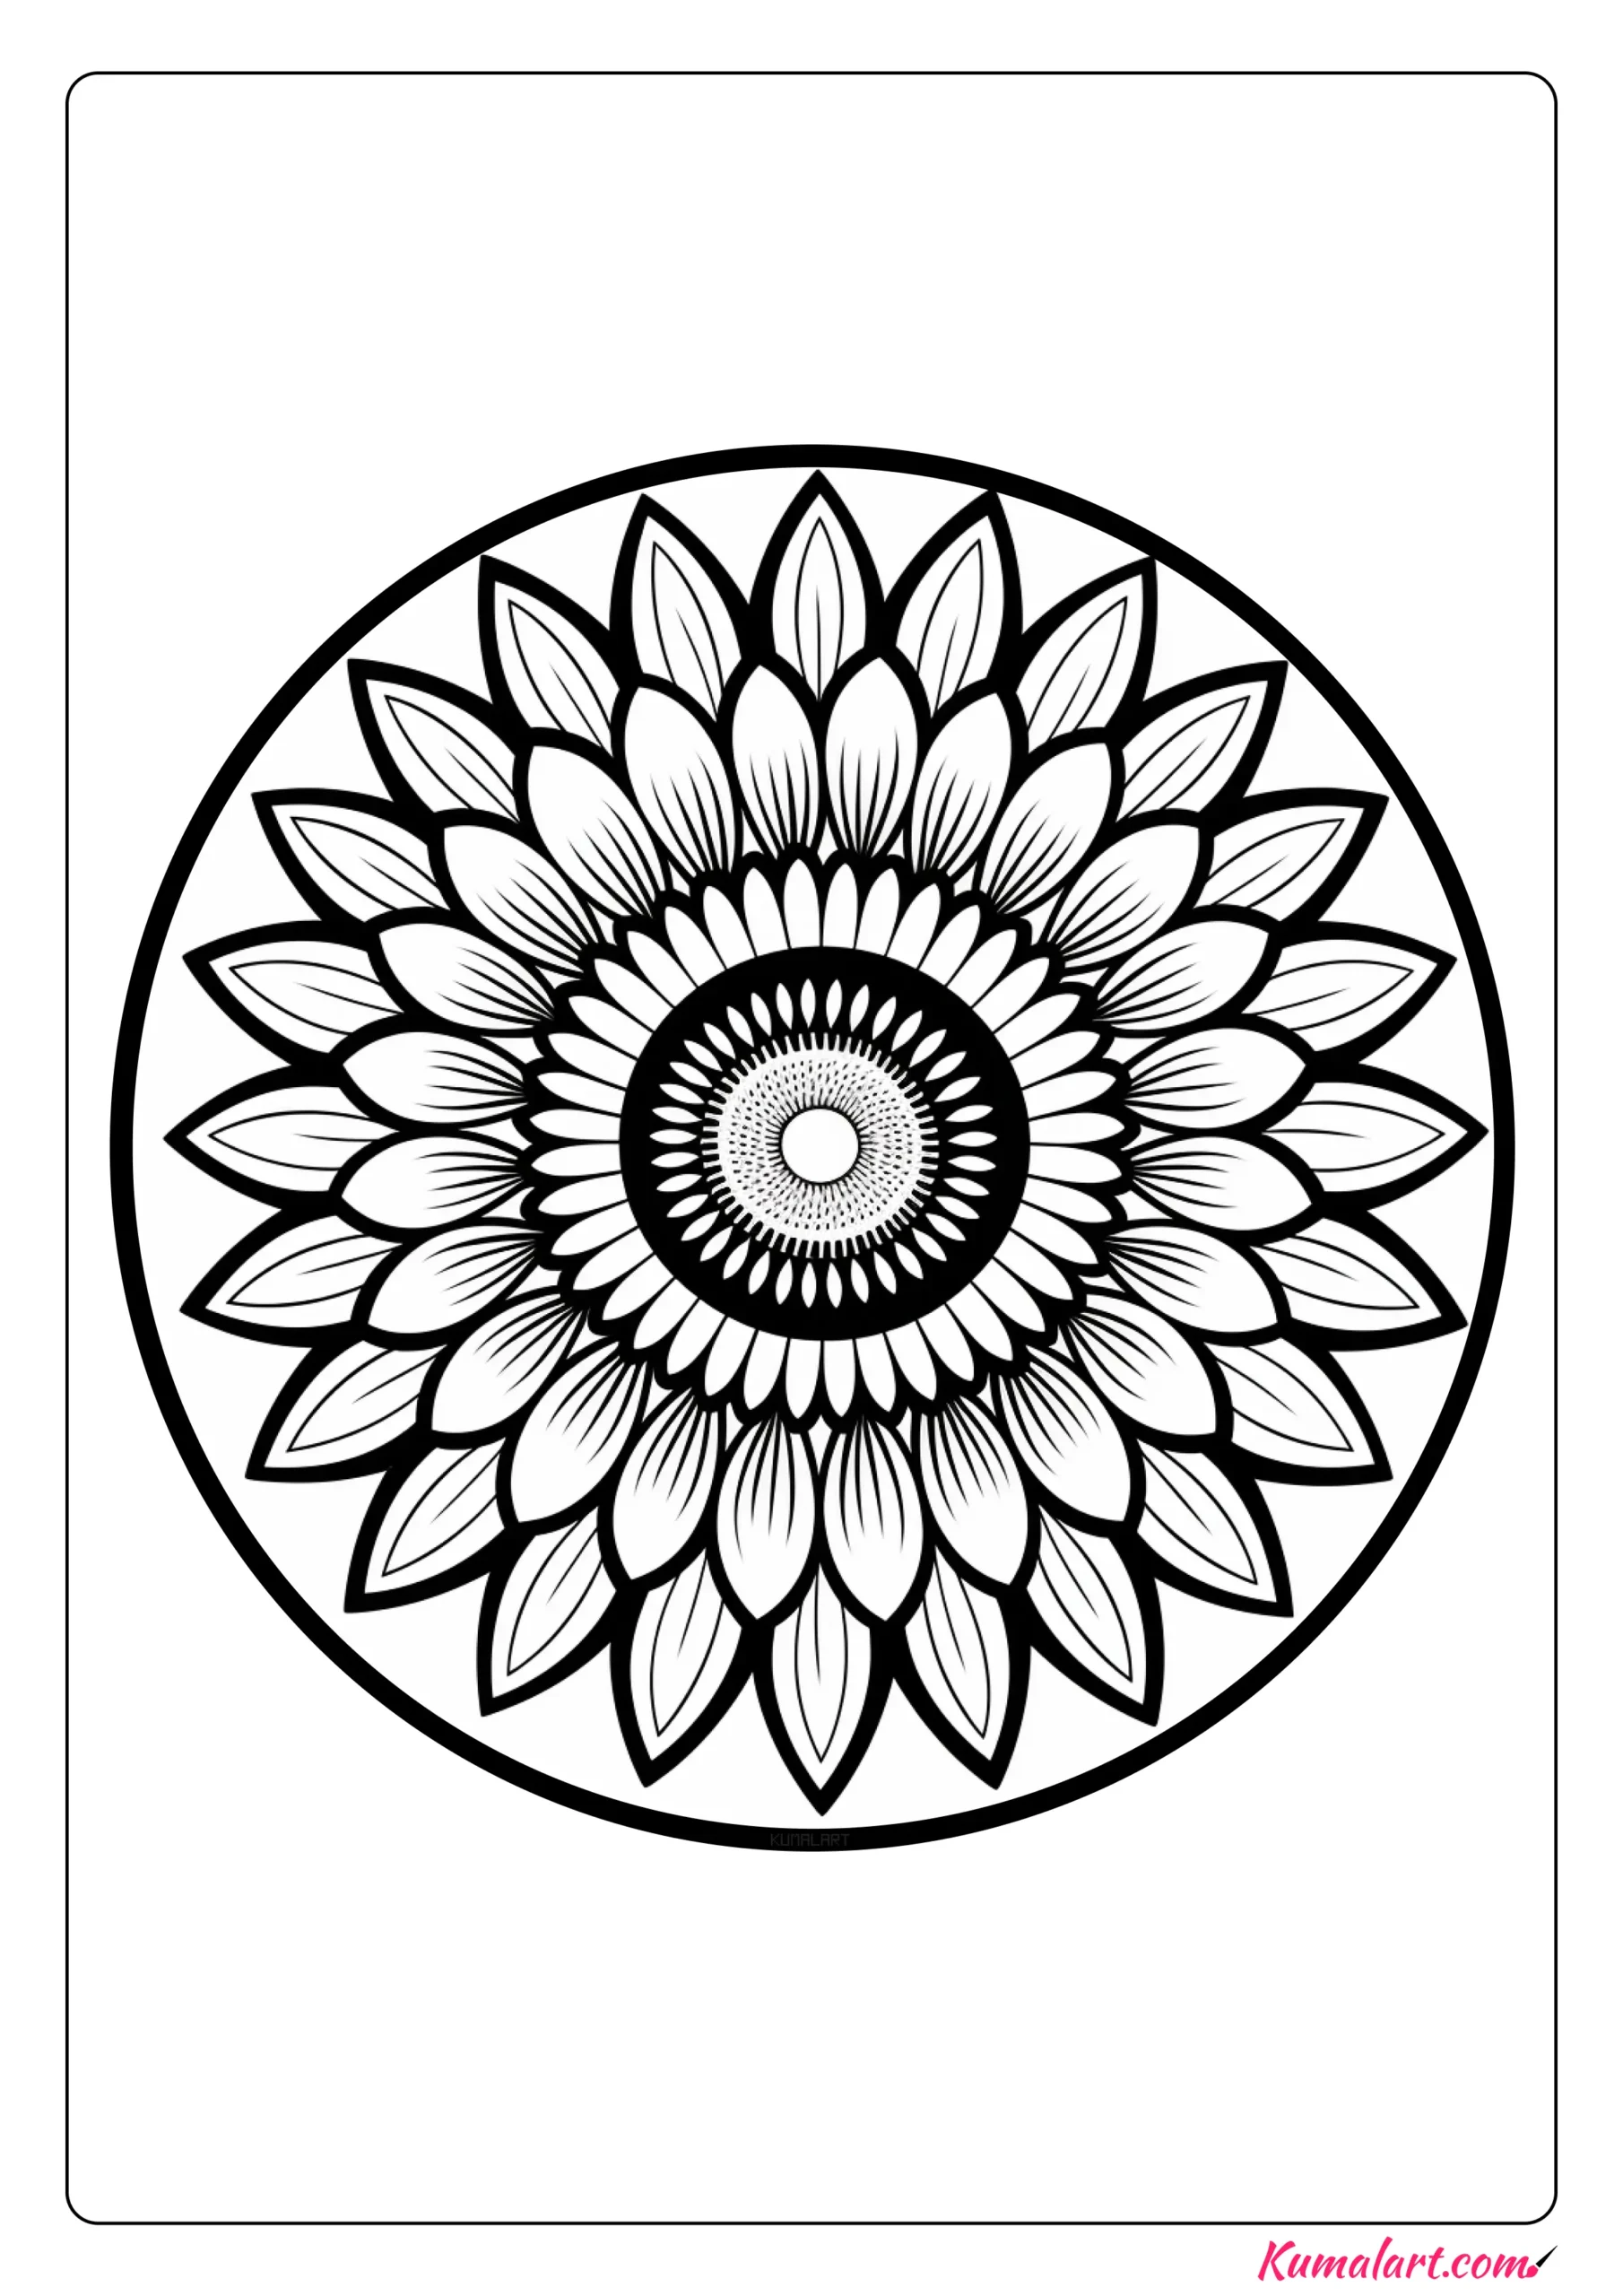 Floral Sunflower Coloring Page